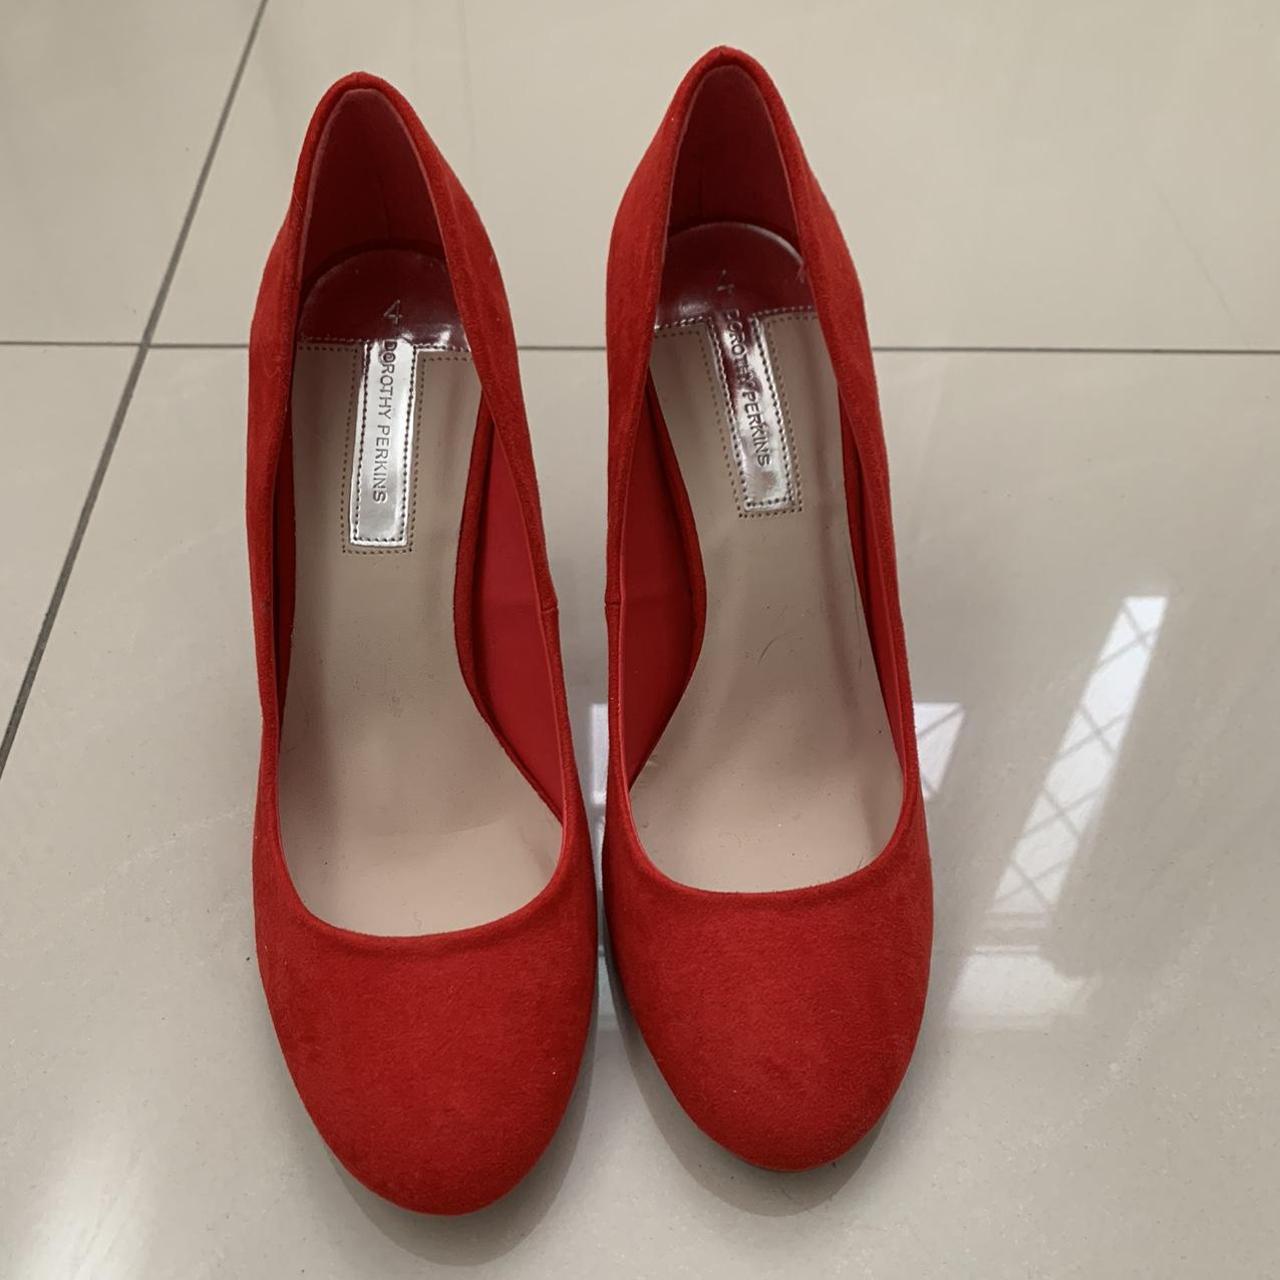 Red Suede Heels From Dorothy Perkins Size 4 Never Depop 6222